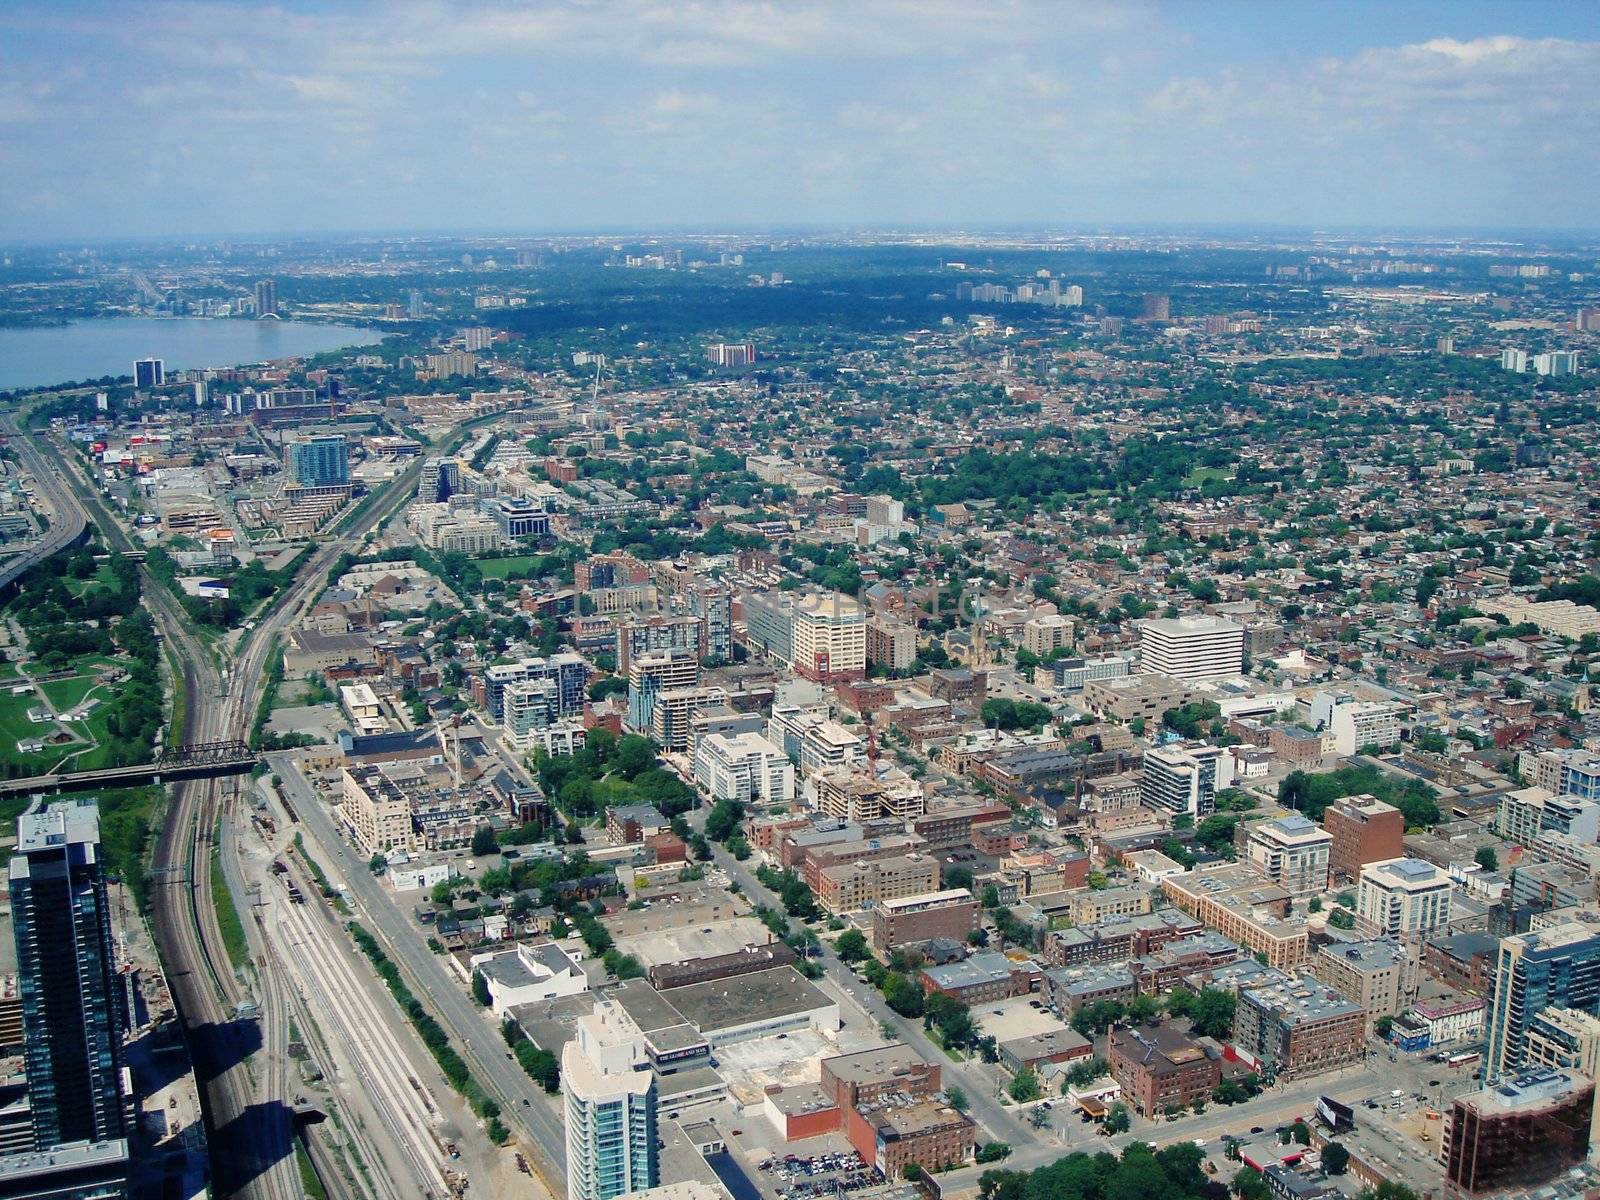 Aerial view of Toronto city from the CN Tower, Canada